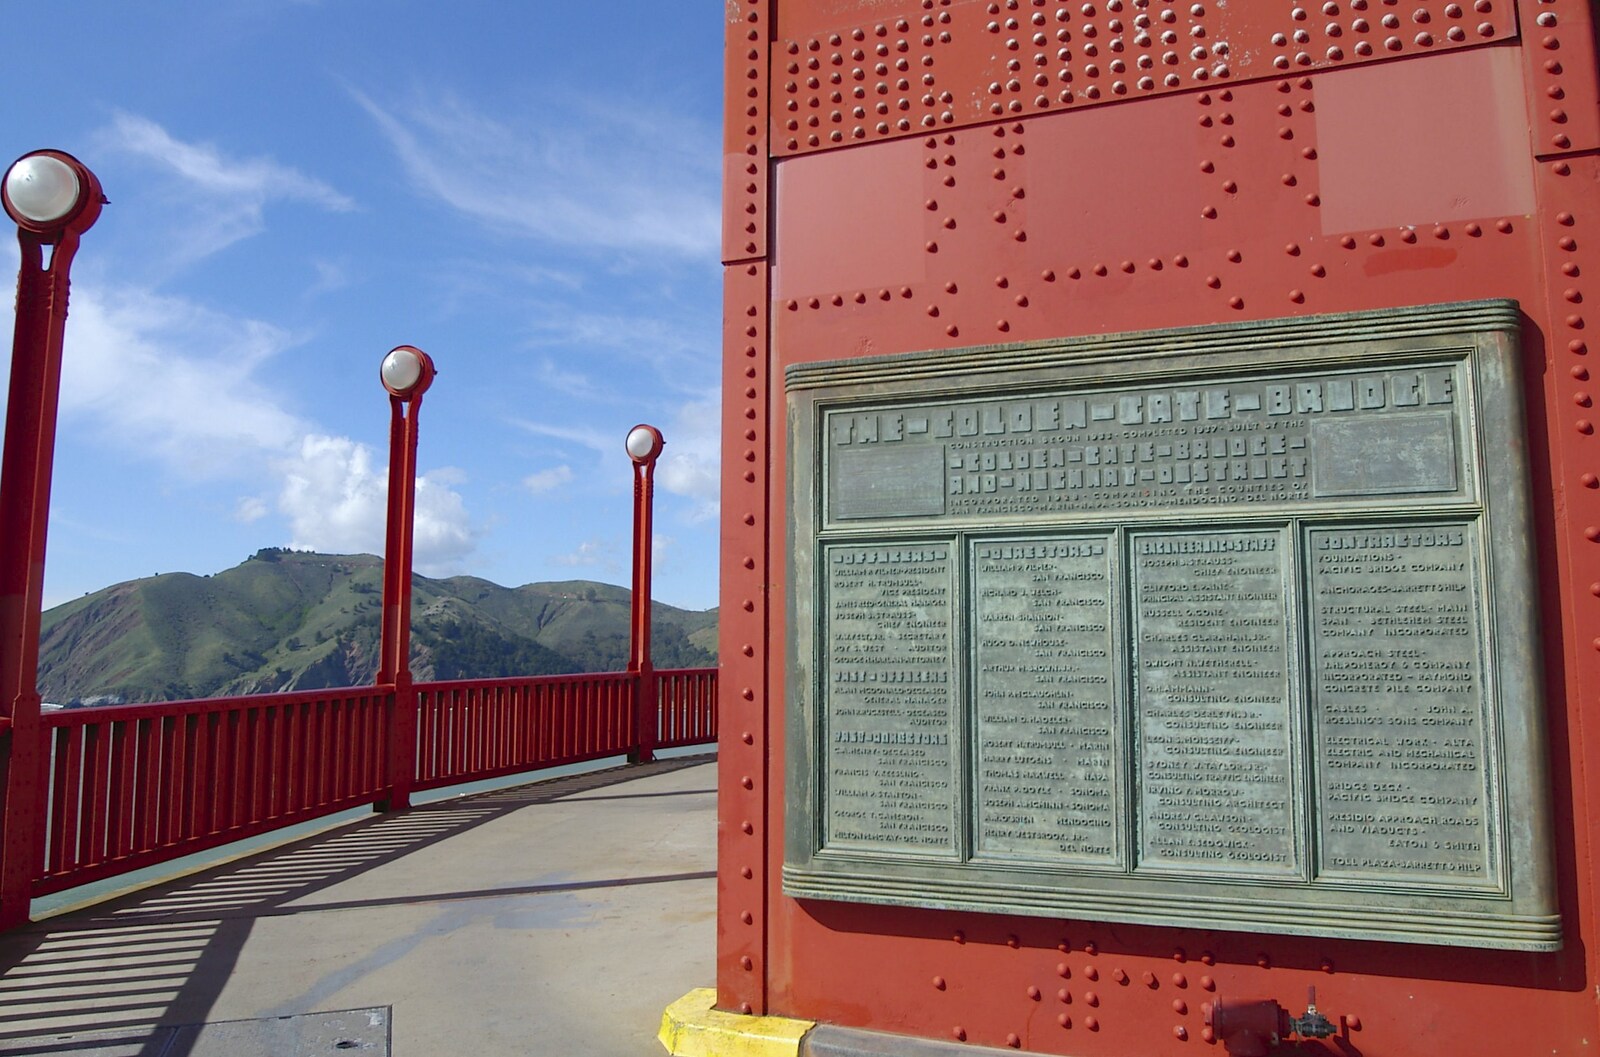 A plaque dedicated to the engineers and builders from The Golden Gate Bridge, San Francisco, California, US - 11th March 2006